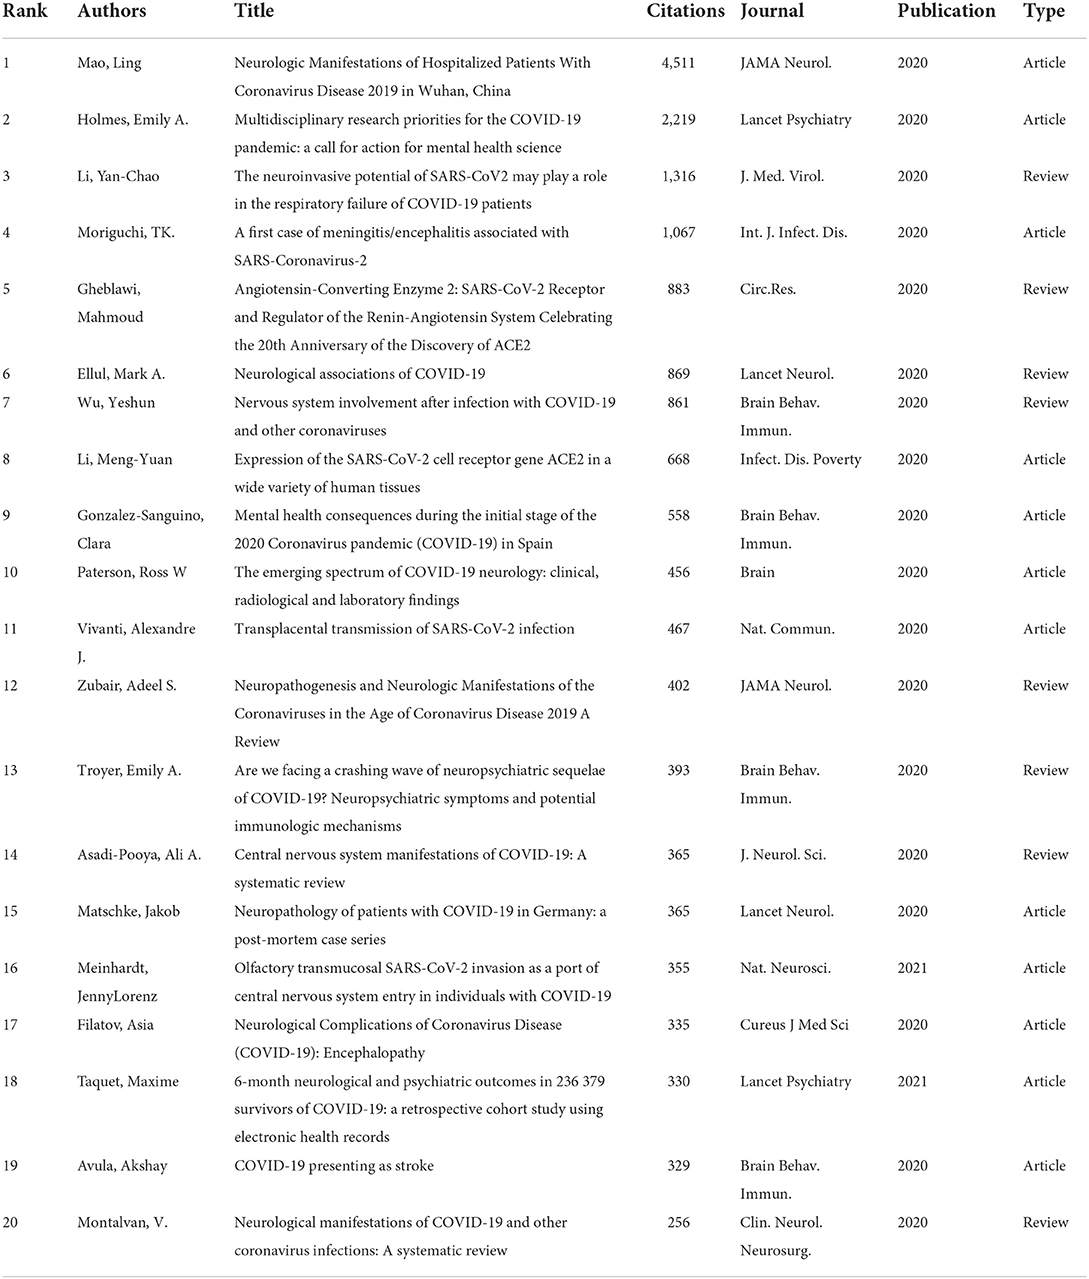 Frontiers | A bibliometric analysis of COVID-19 publications in ...